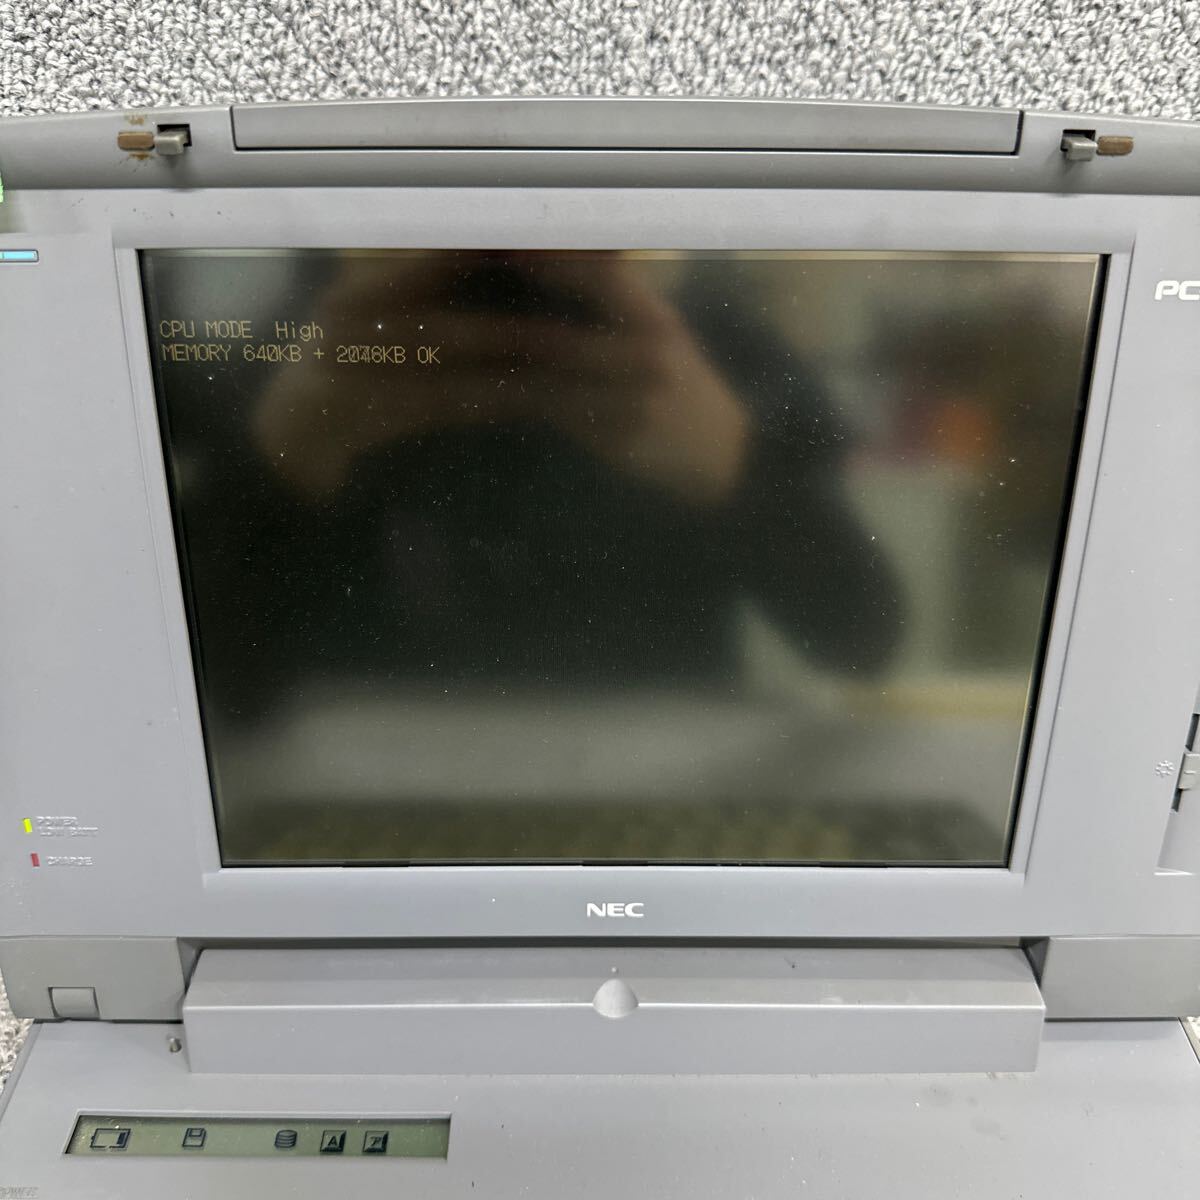 PCN98-1822 super-discount PC98 notebook NEC 98note PC-9821Ne2/340W start-up has confirmed Junk including in a package possibility 